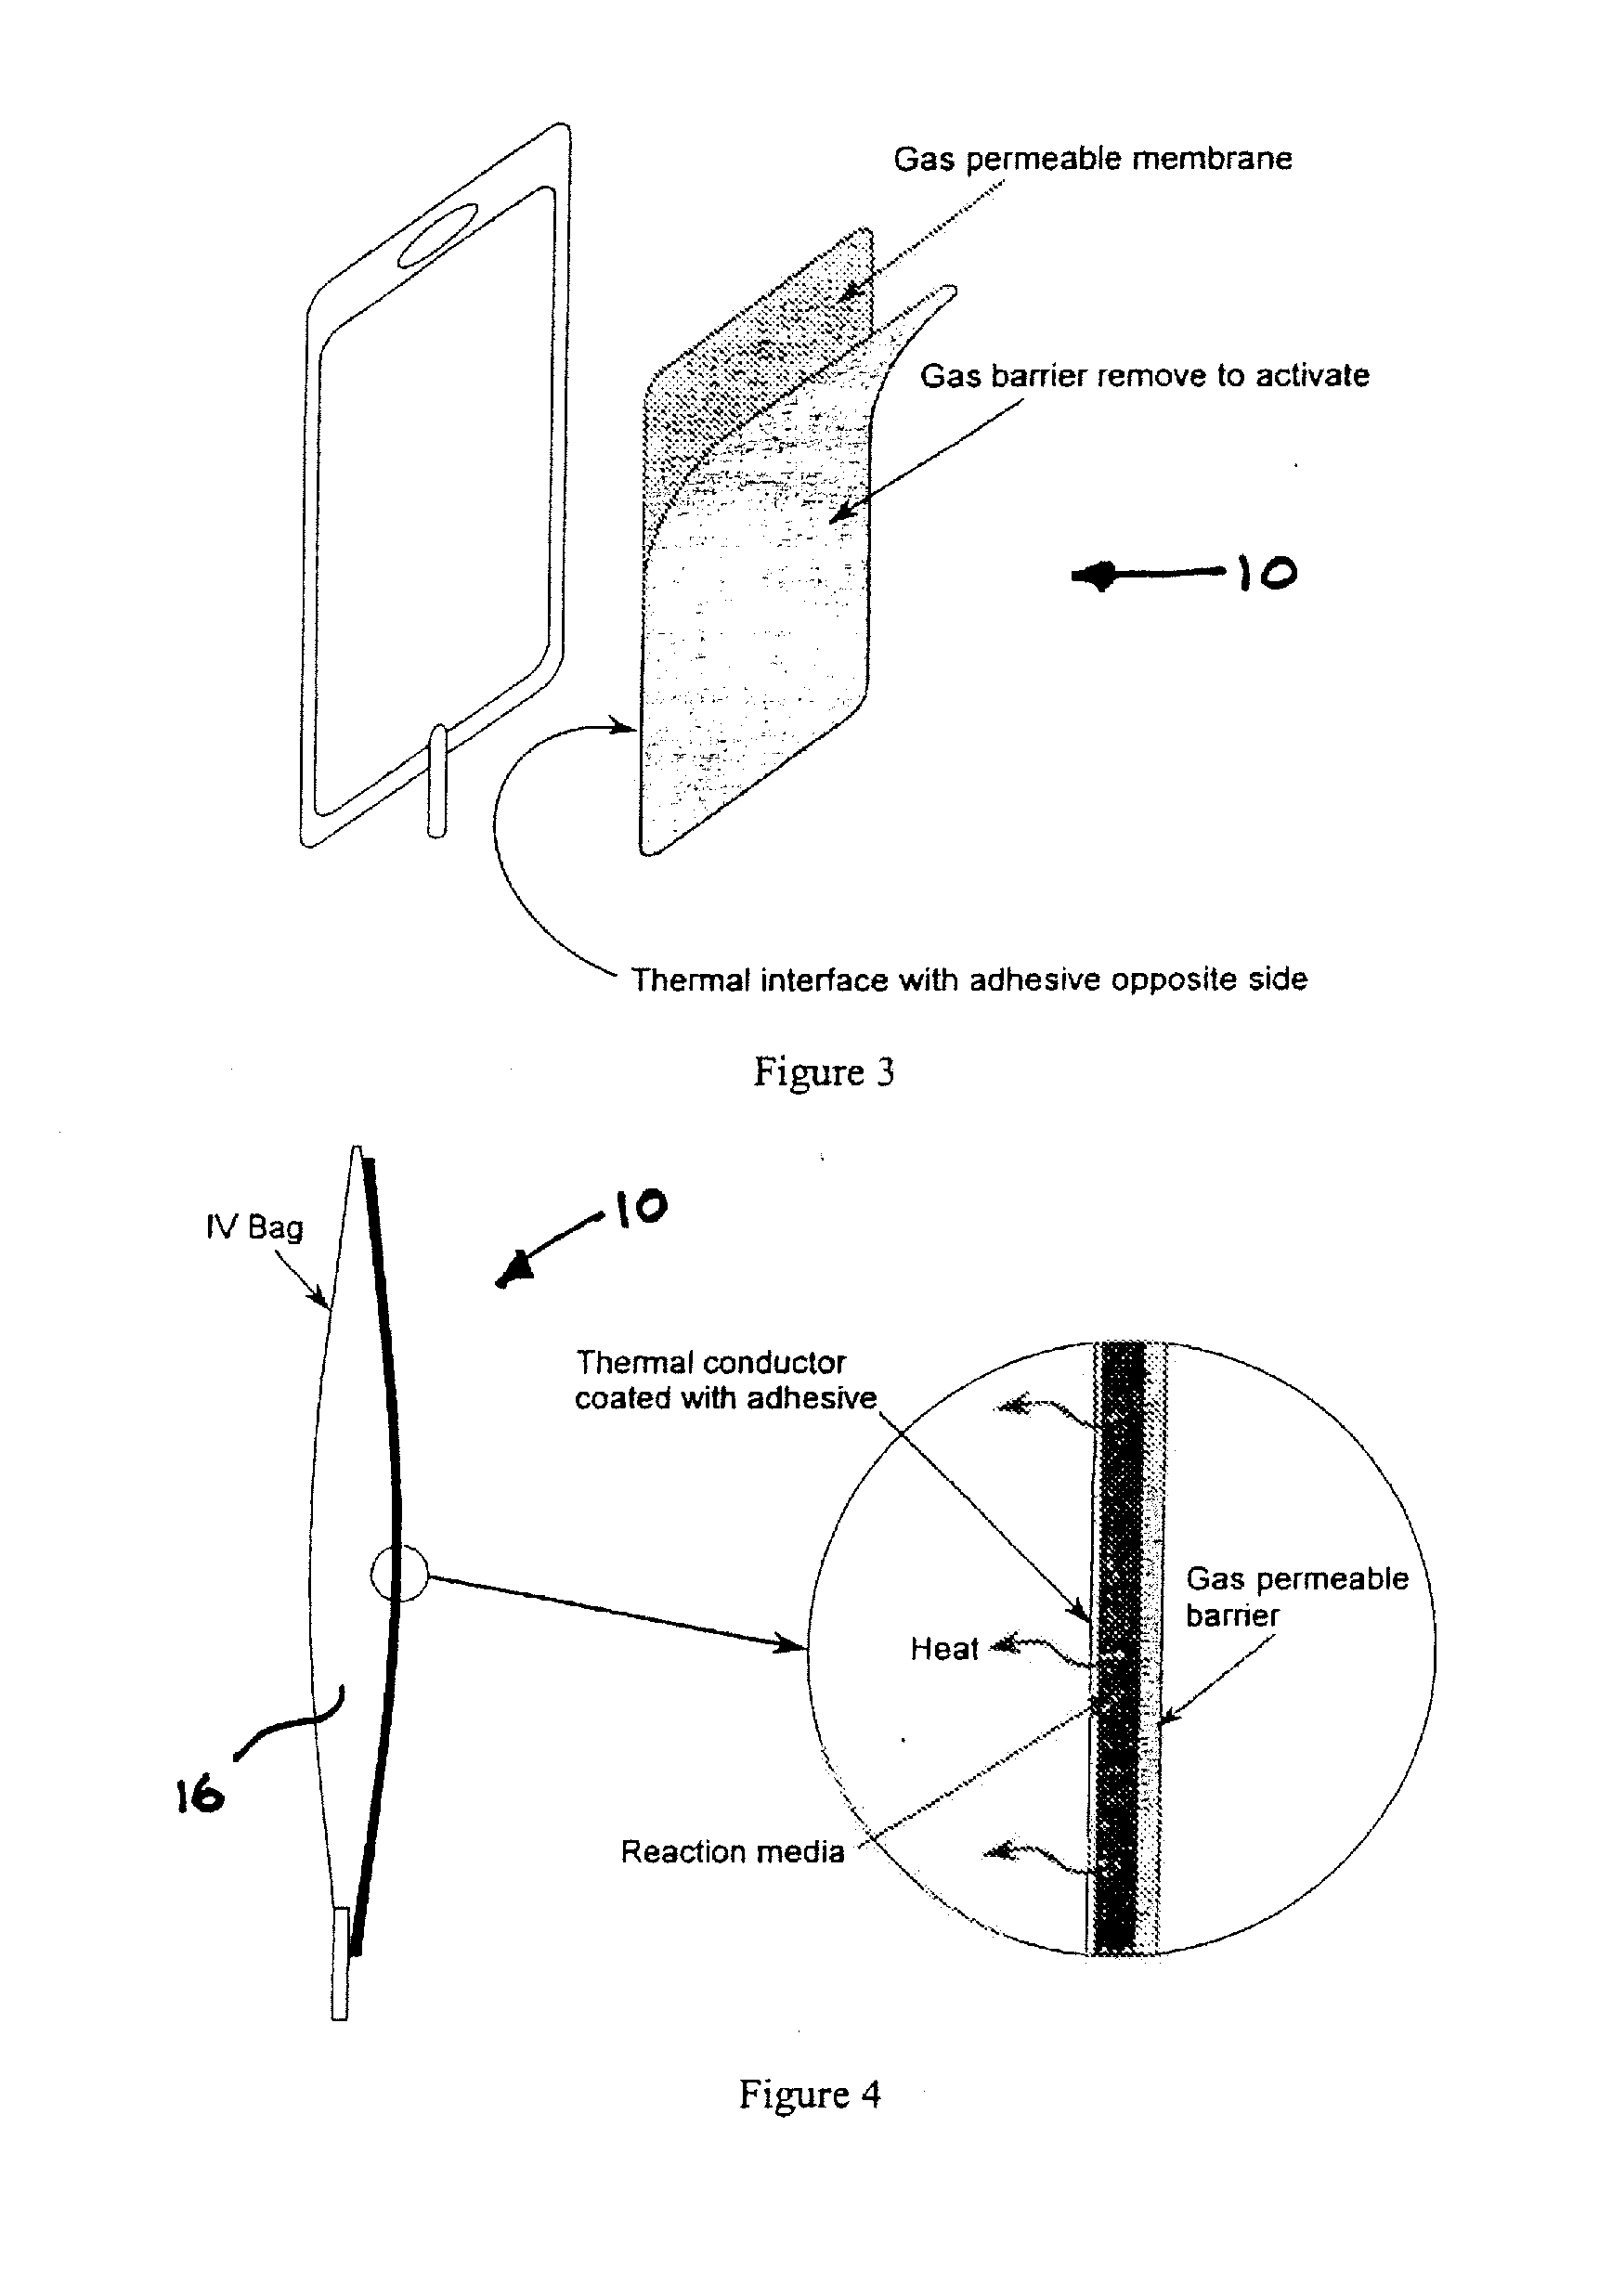 Disposable thermal therapeutic apparatus and method of thermally controlling the delivery of medication therewith